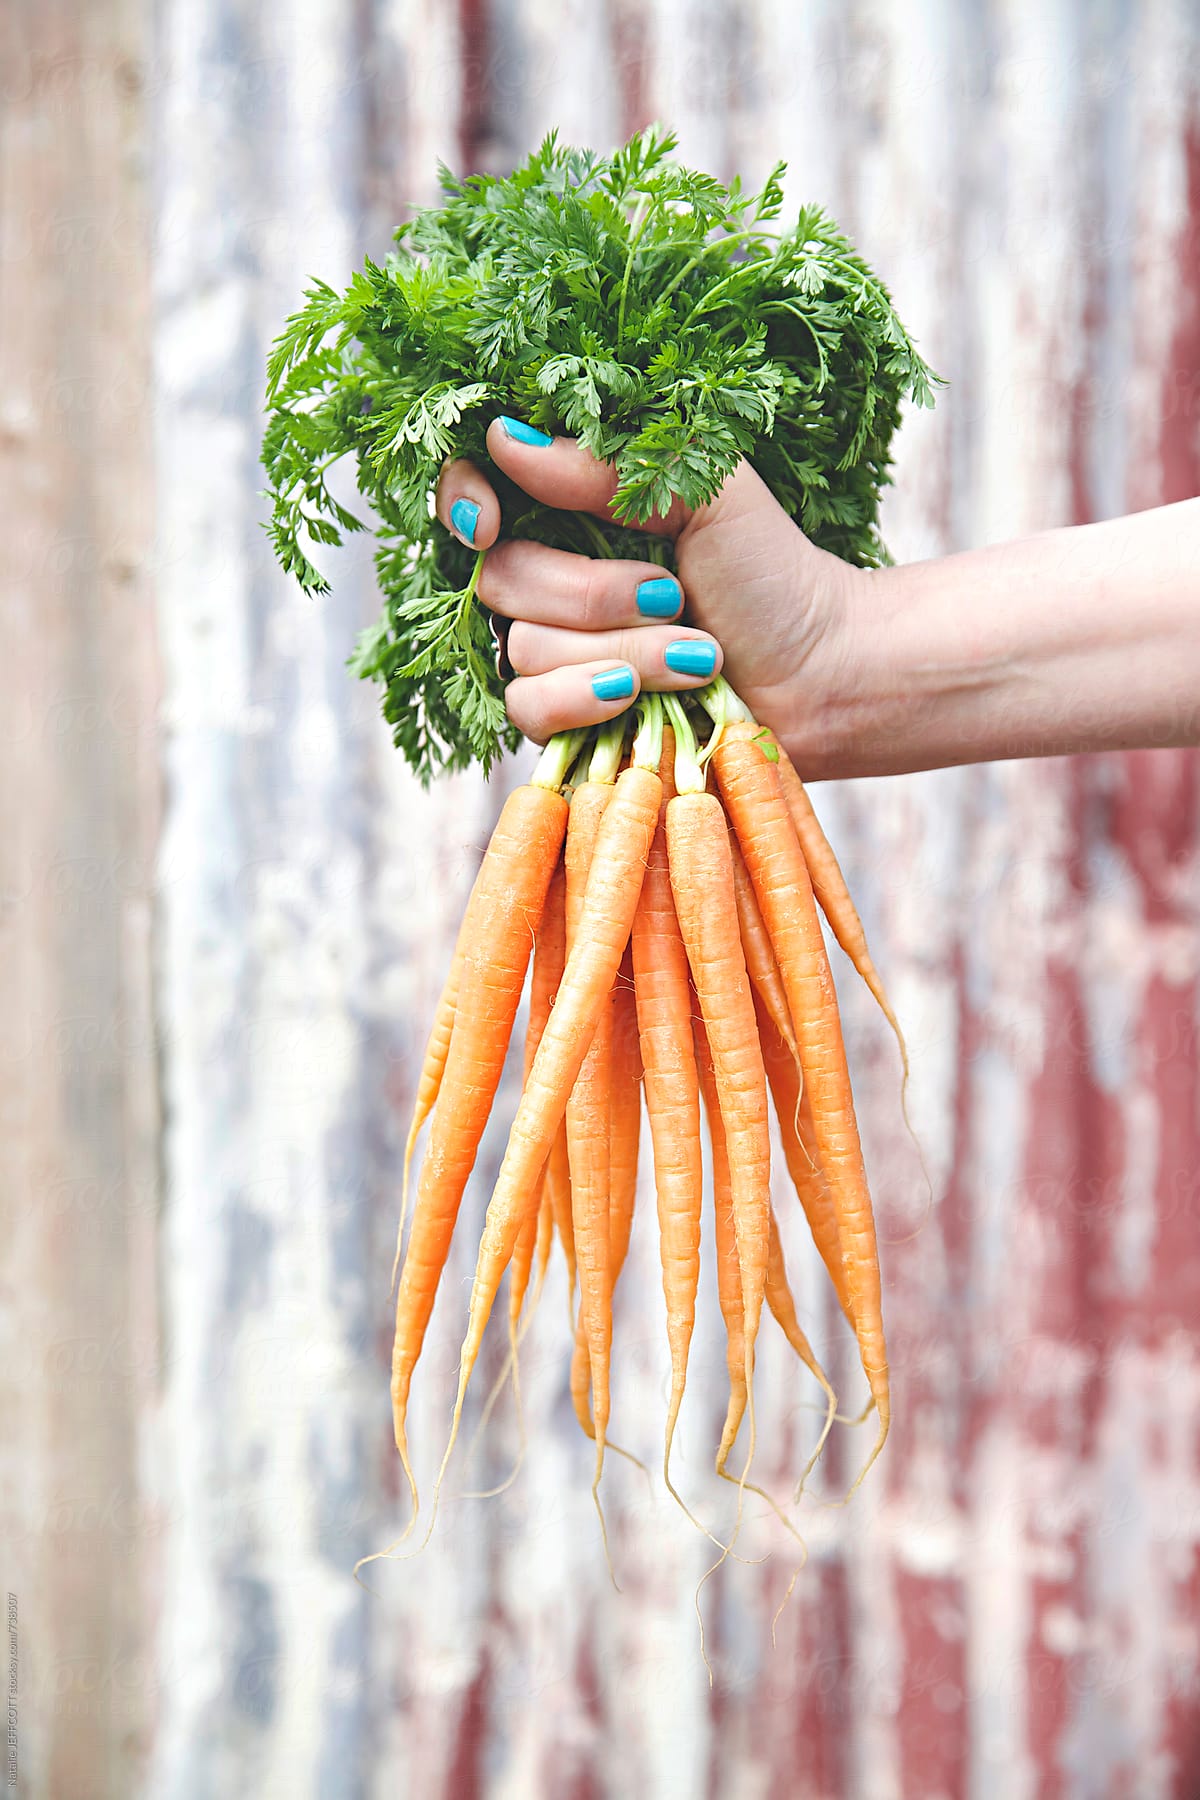 Lady's hand with blue nail polish holding fresh baby carrots